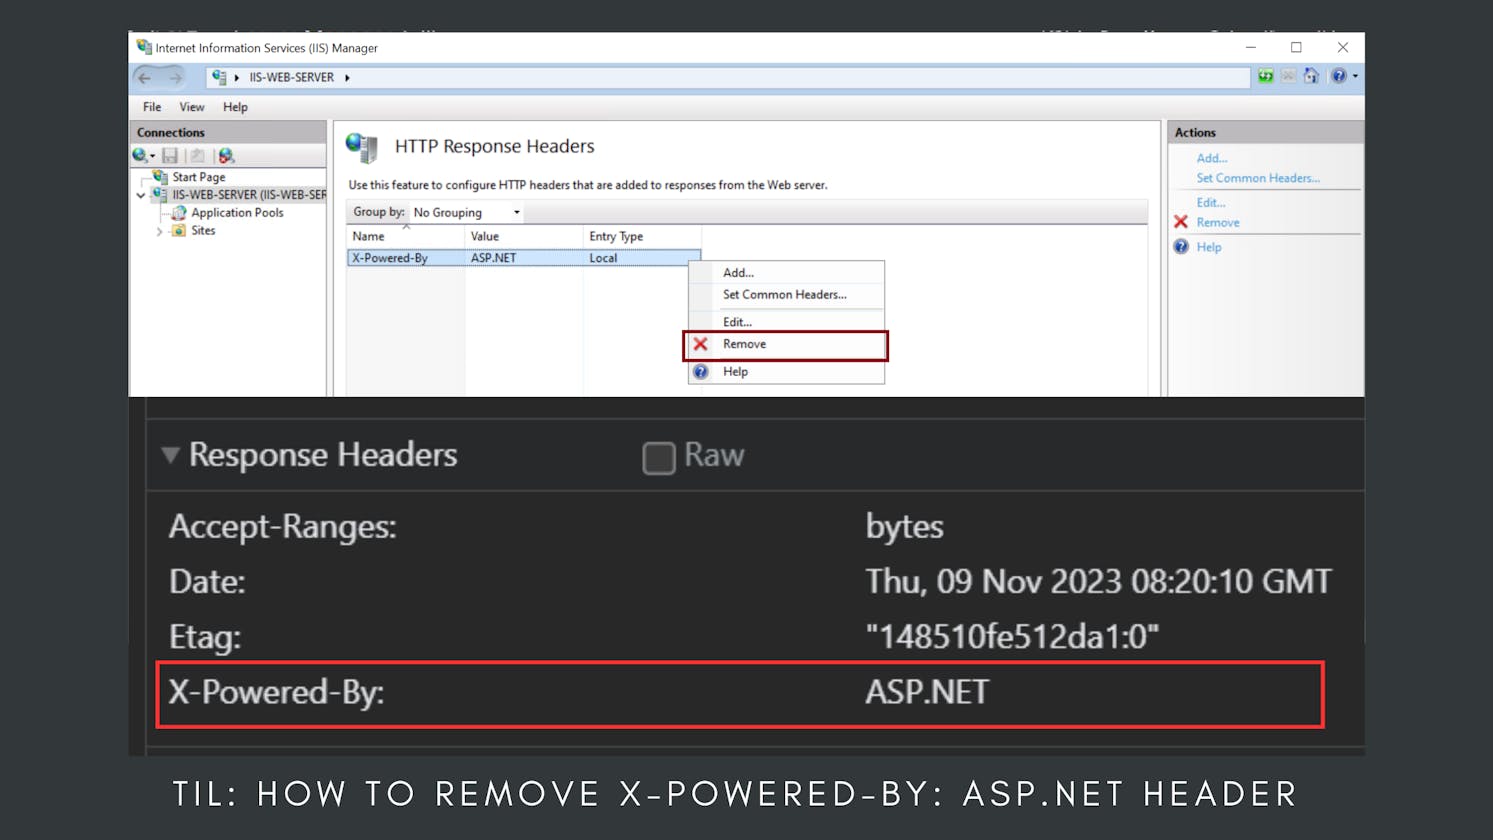 TIL: How to remove X-Powered-By: ASP.NET Header